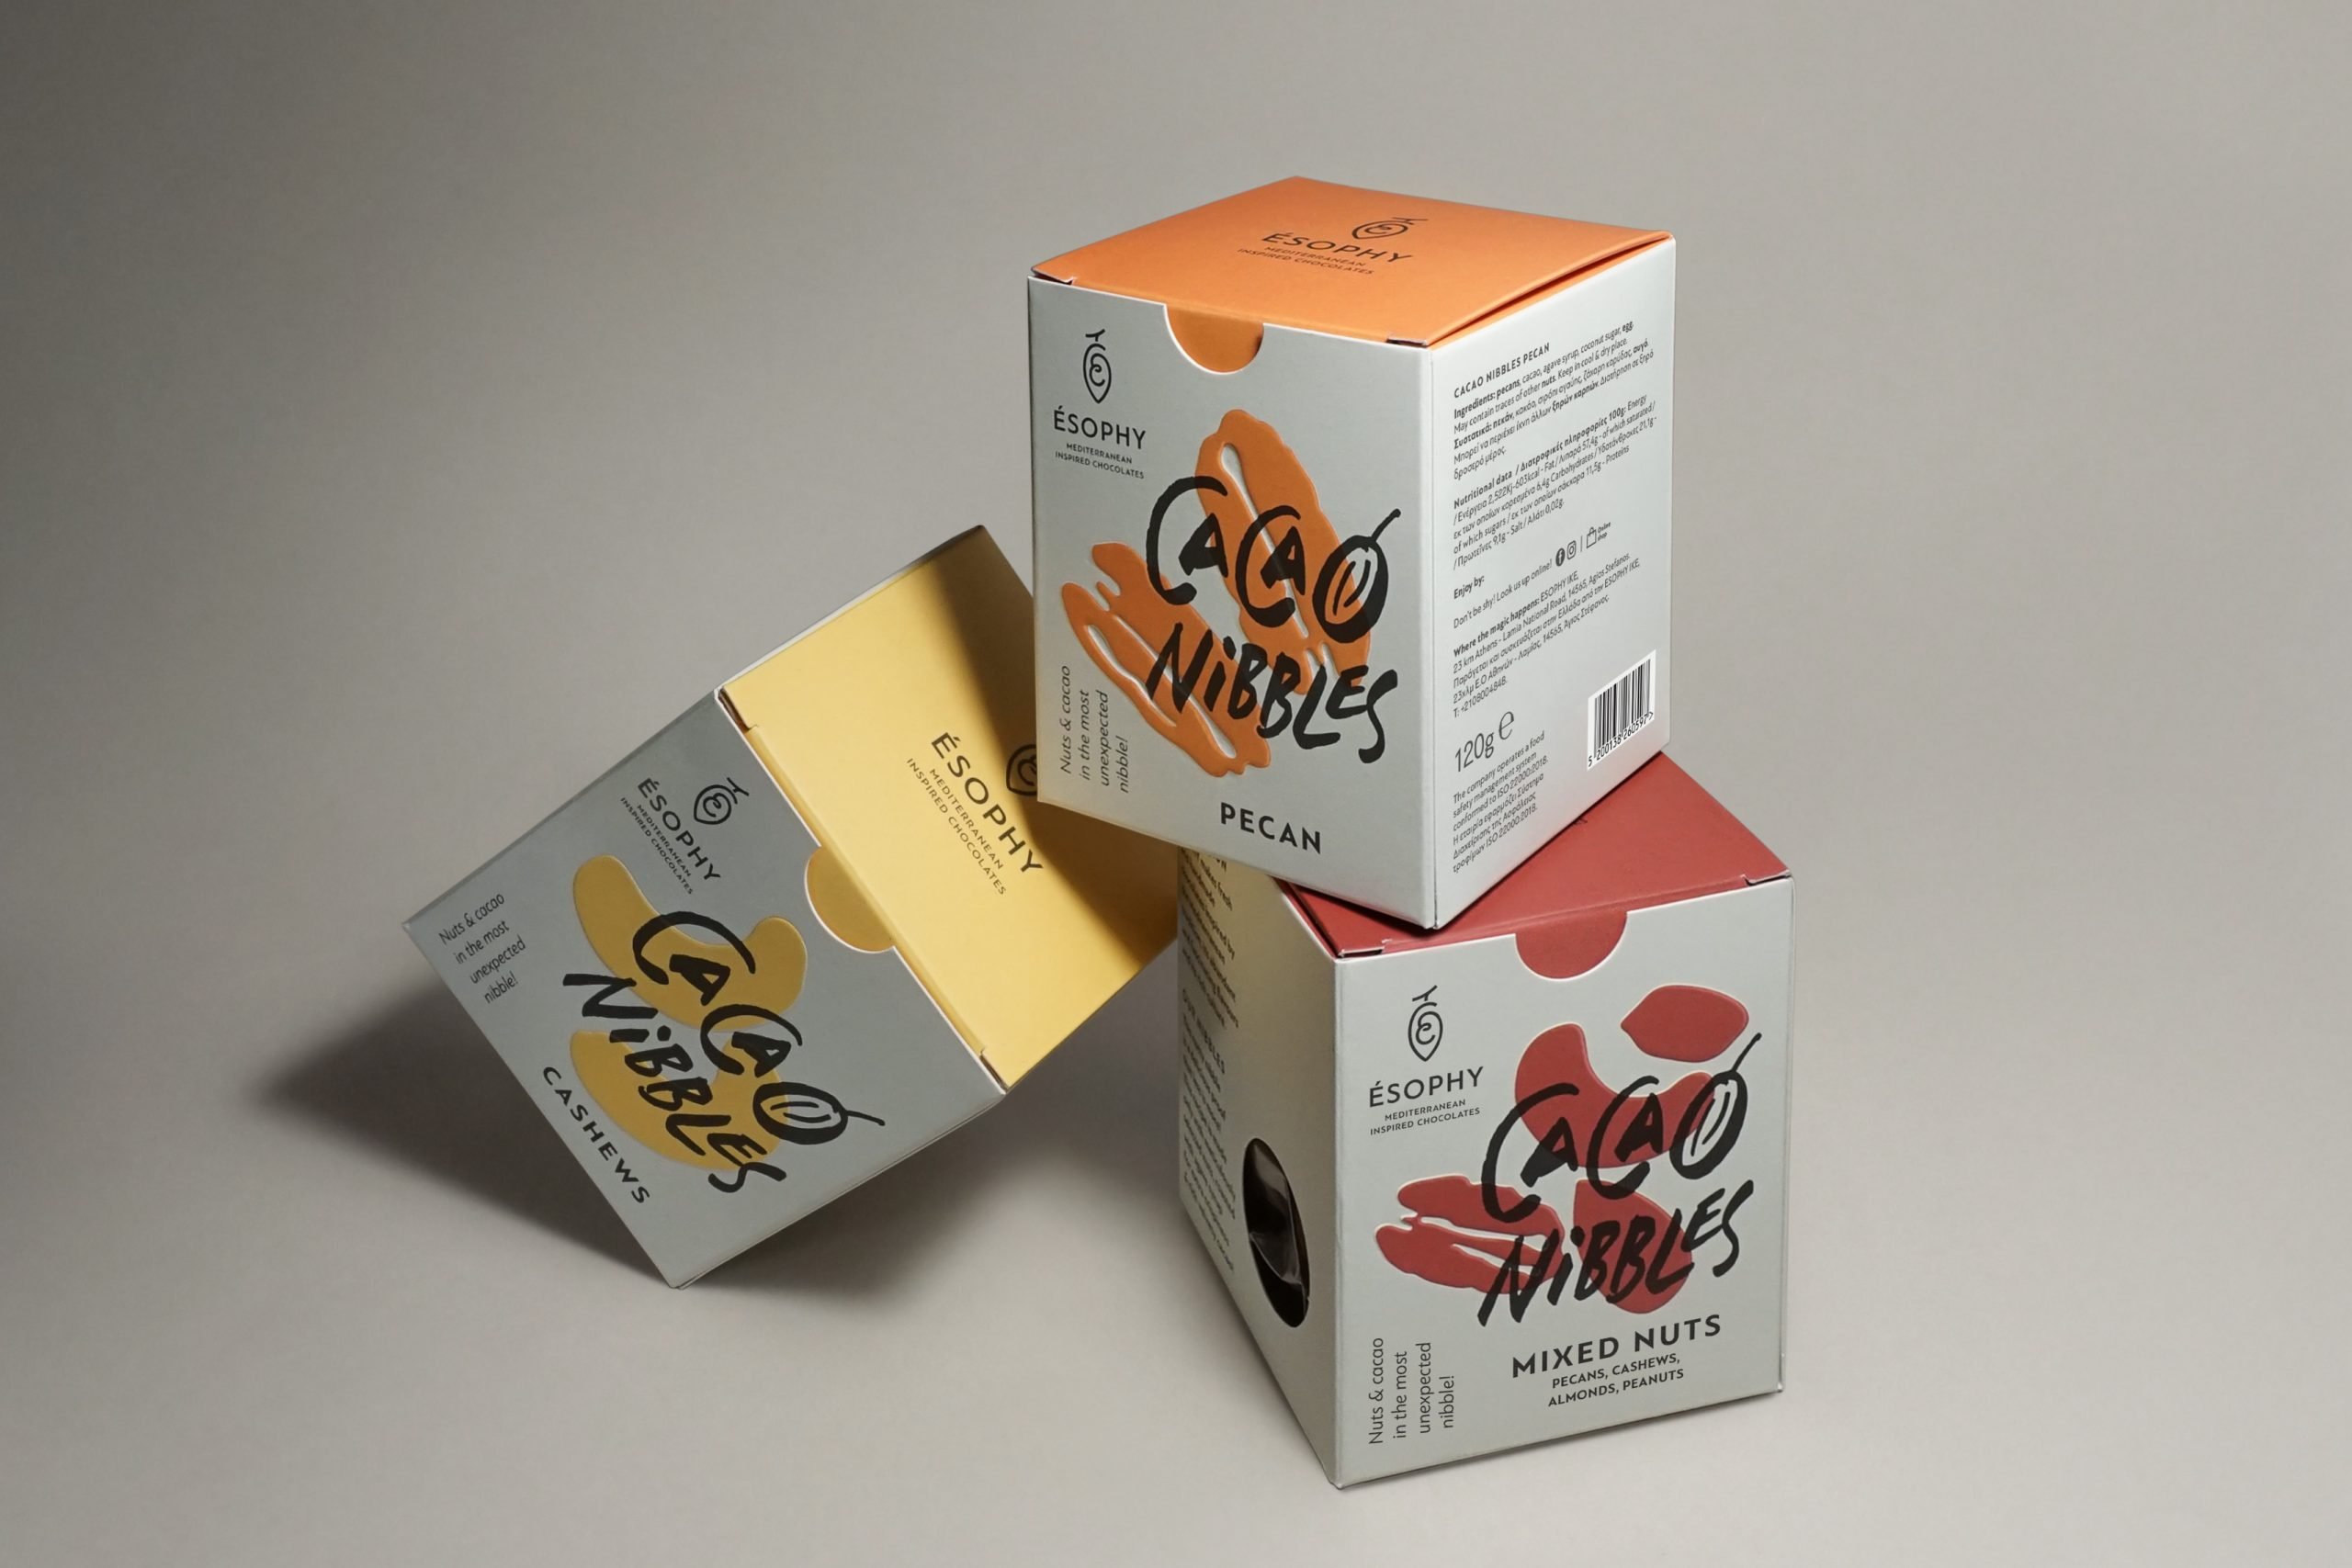 ÉSOPHY’s Cacao Nibbles Have a Funky, Witty Design Matisse Would Probably Love